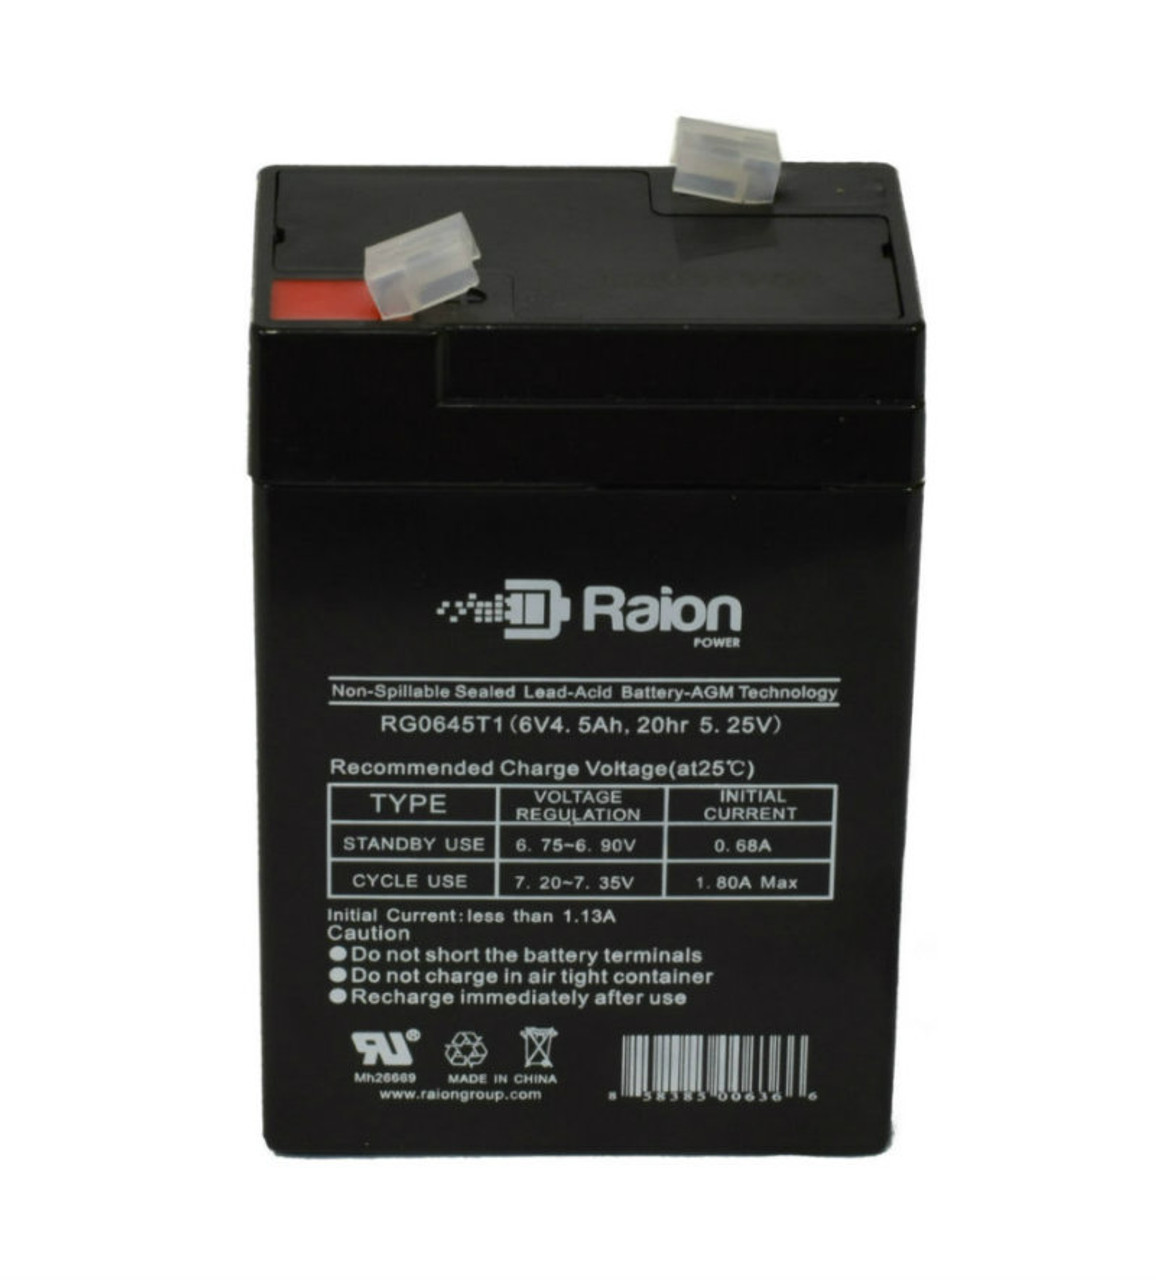 Raion Power RG0645T1 Replacement Battery Cartridge for Teledyne SQ6S5